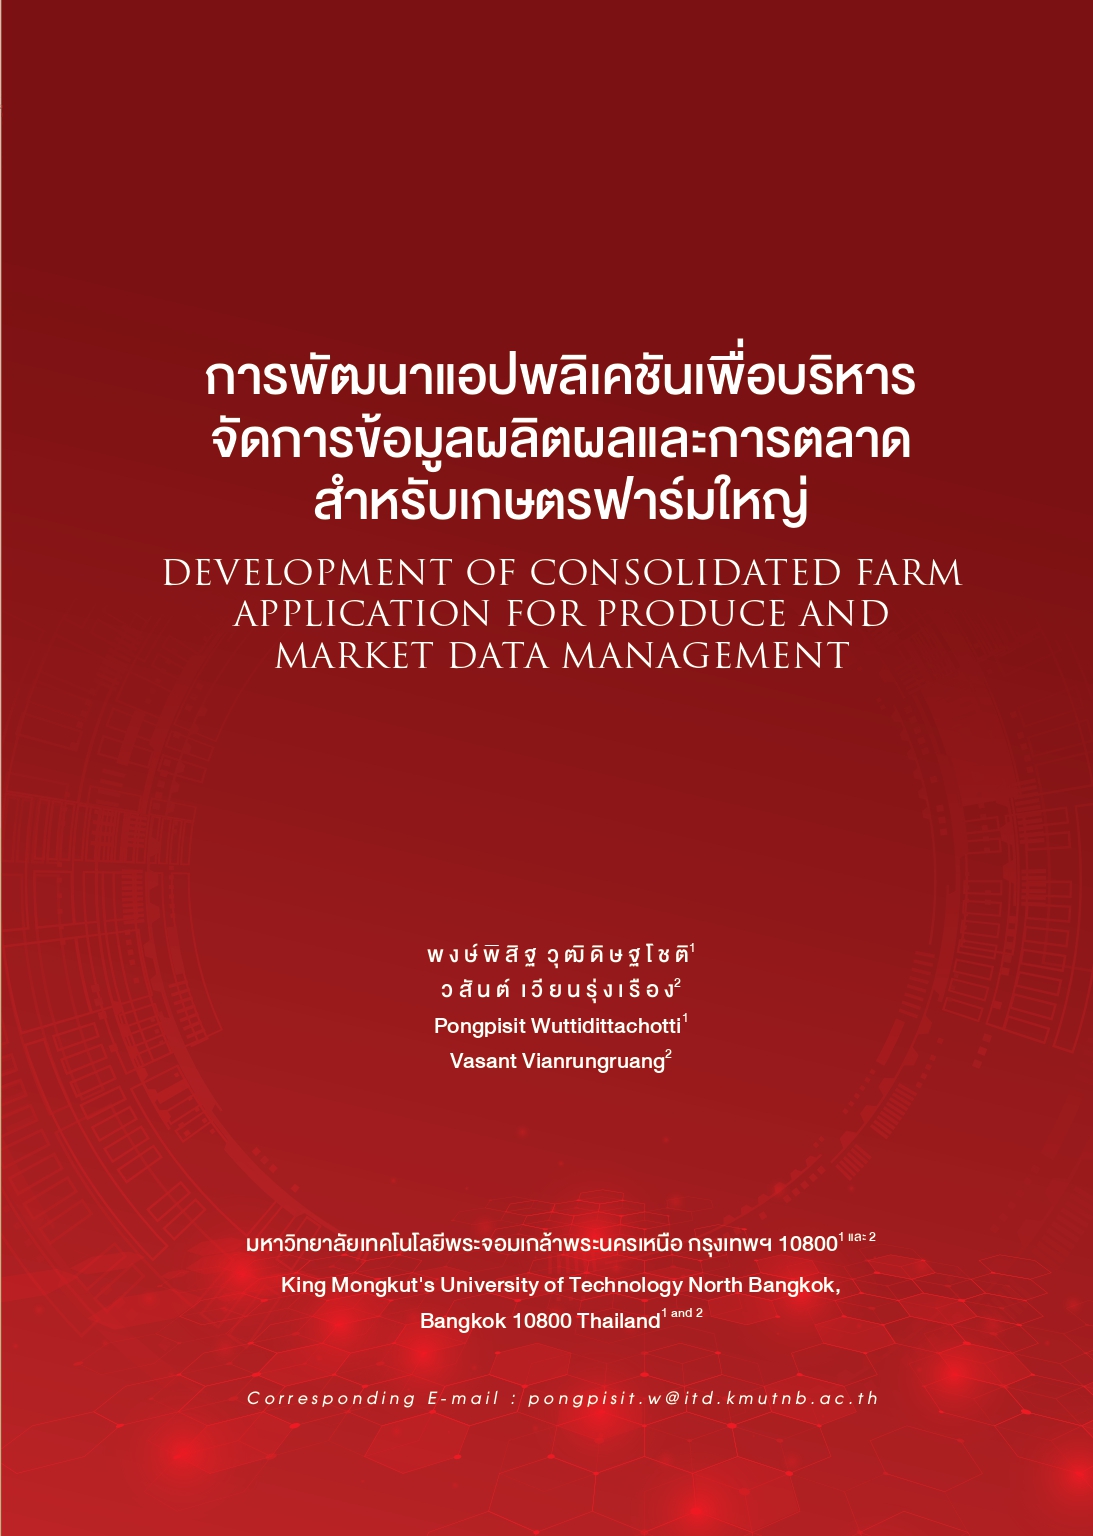 DEVELOPMENT OF CONSOLIDATED FARM APPLICATION FOR PRODUCE AND MARKET DATA MANAGEMENT